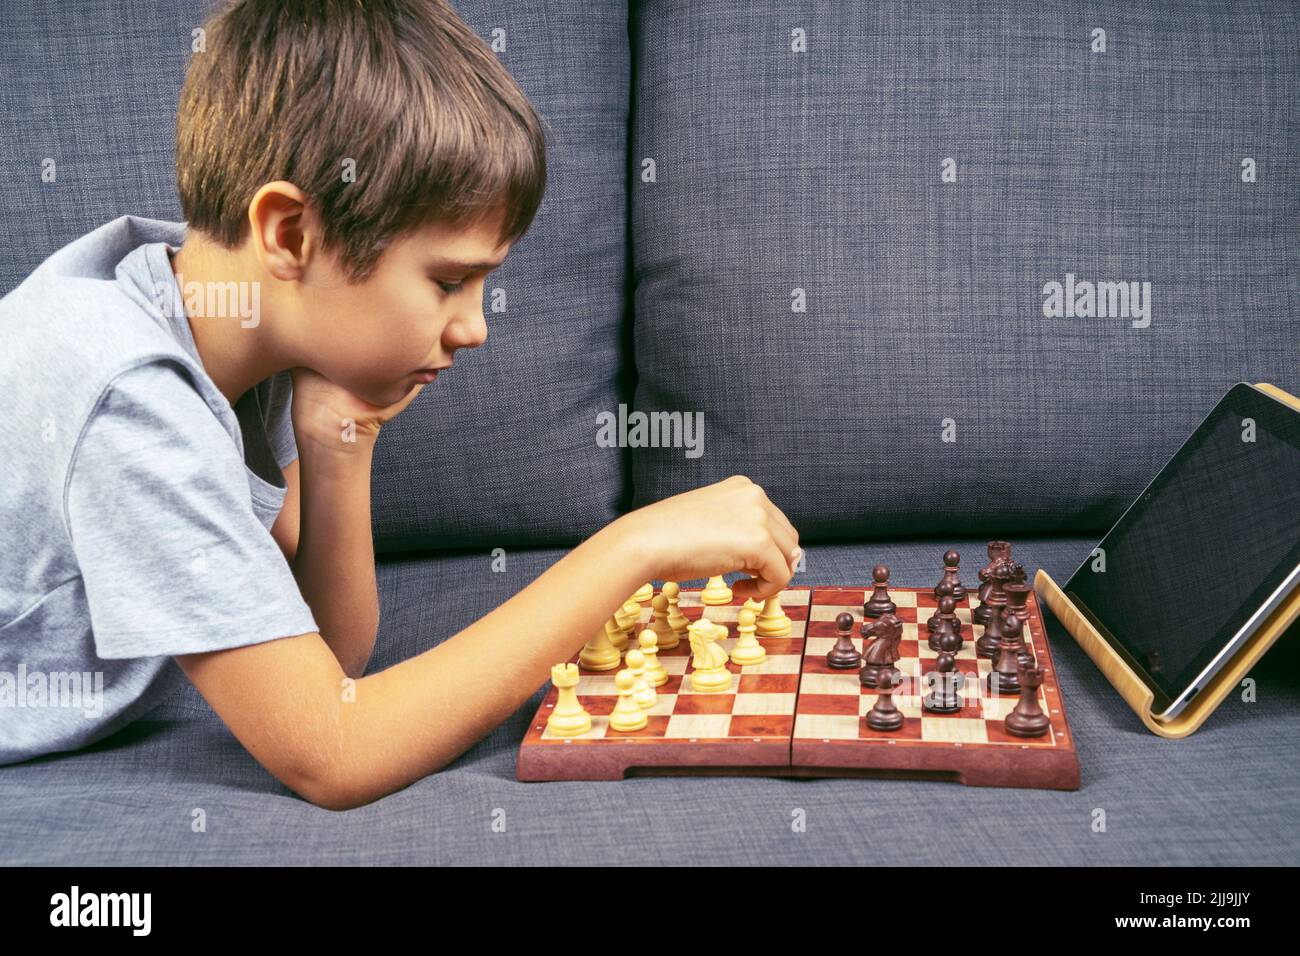 Teenage boy learning to play chess online with tablet computer